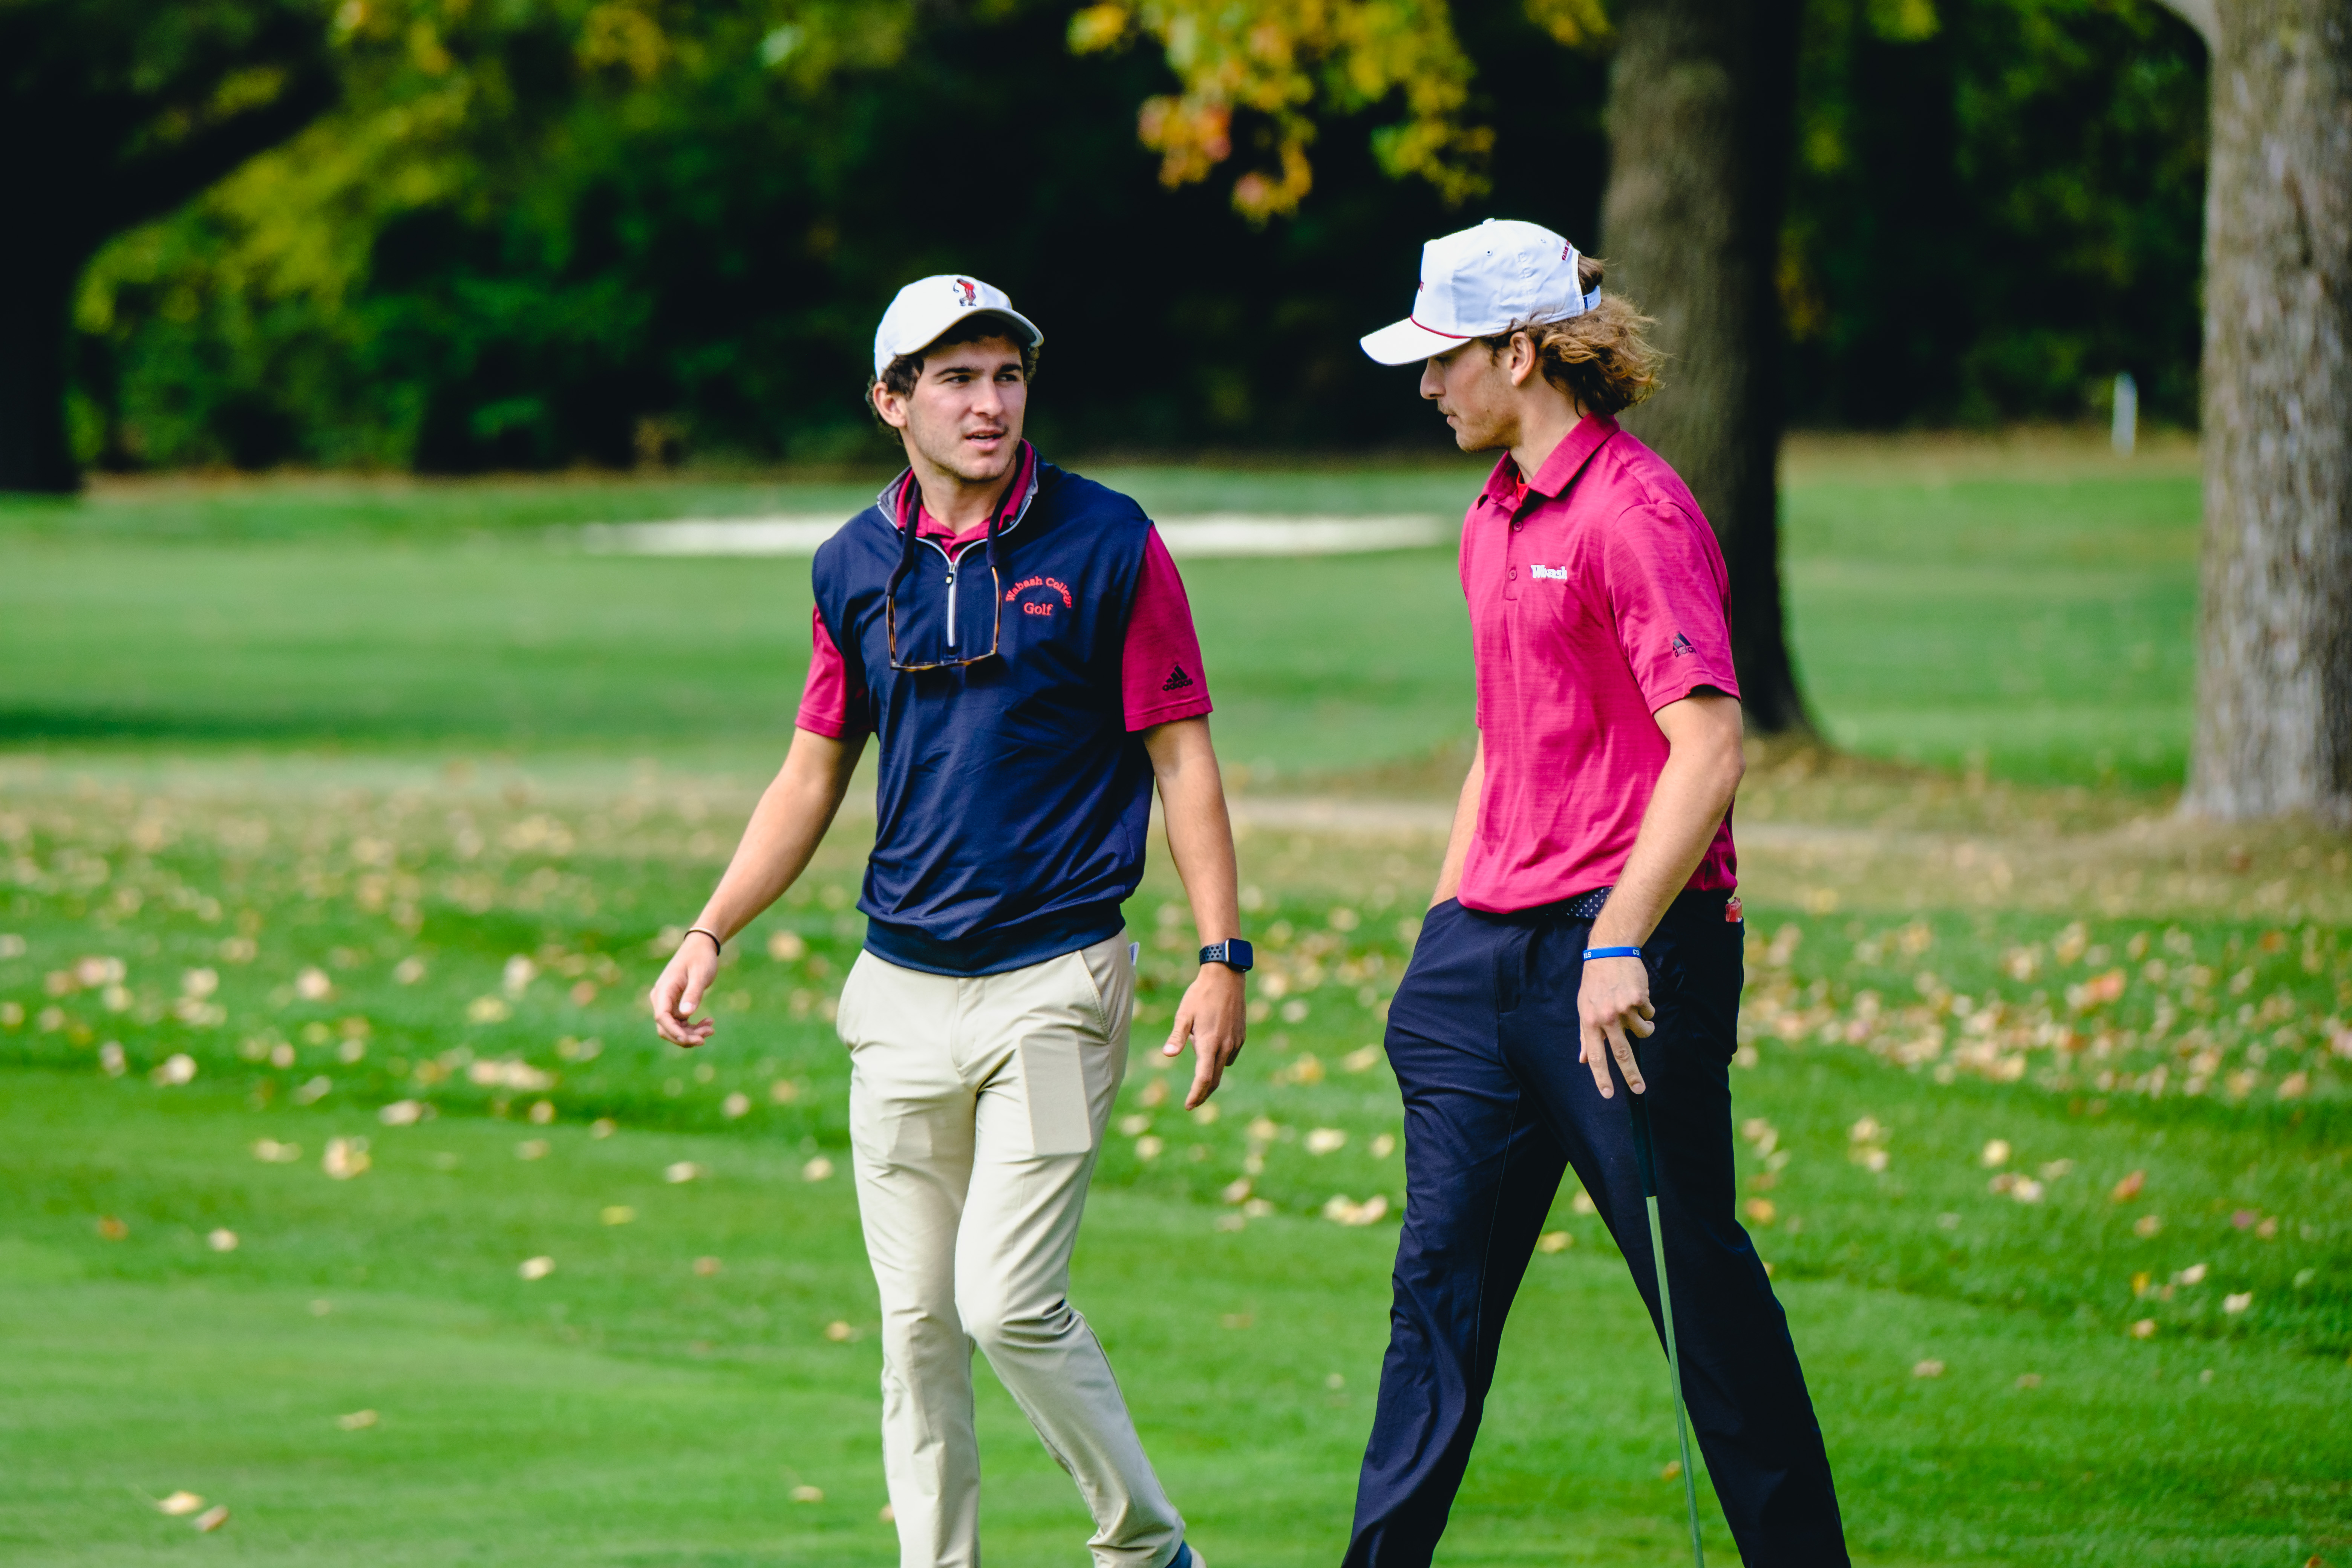 Kopp (left) joined coaching staff after an impressive academic and athletic career as a student at Wabash. He played in 33 rounds over his collegiate career, posted ten top-10 finishes, including three spots in the top five, and earned the Scholar-Athlete Award. 